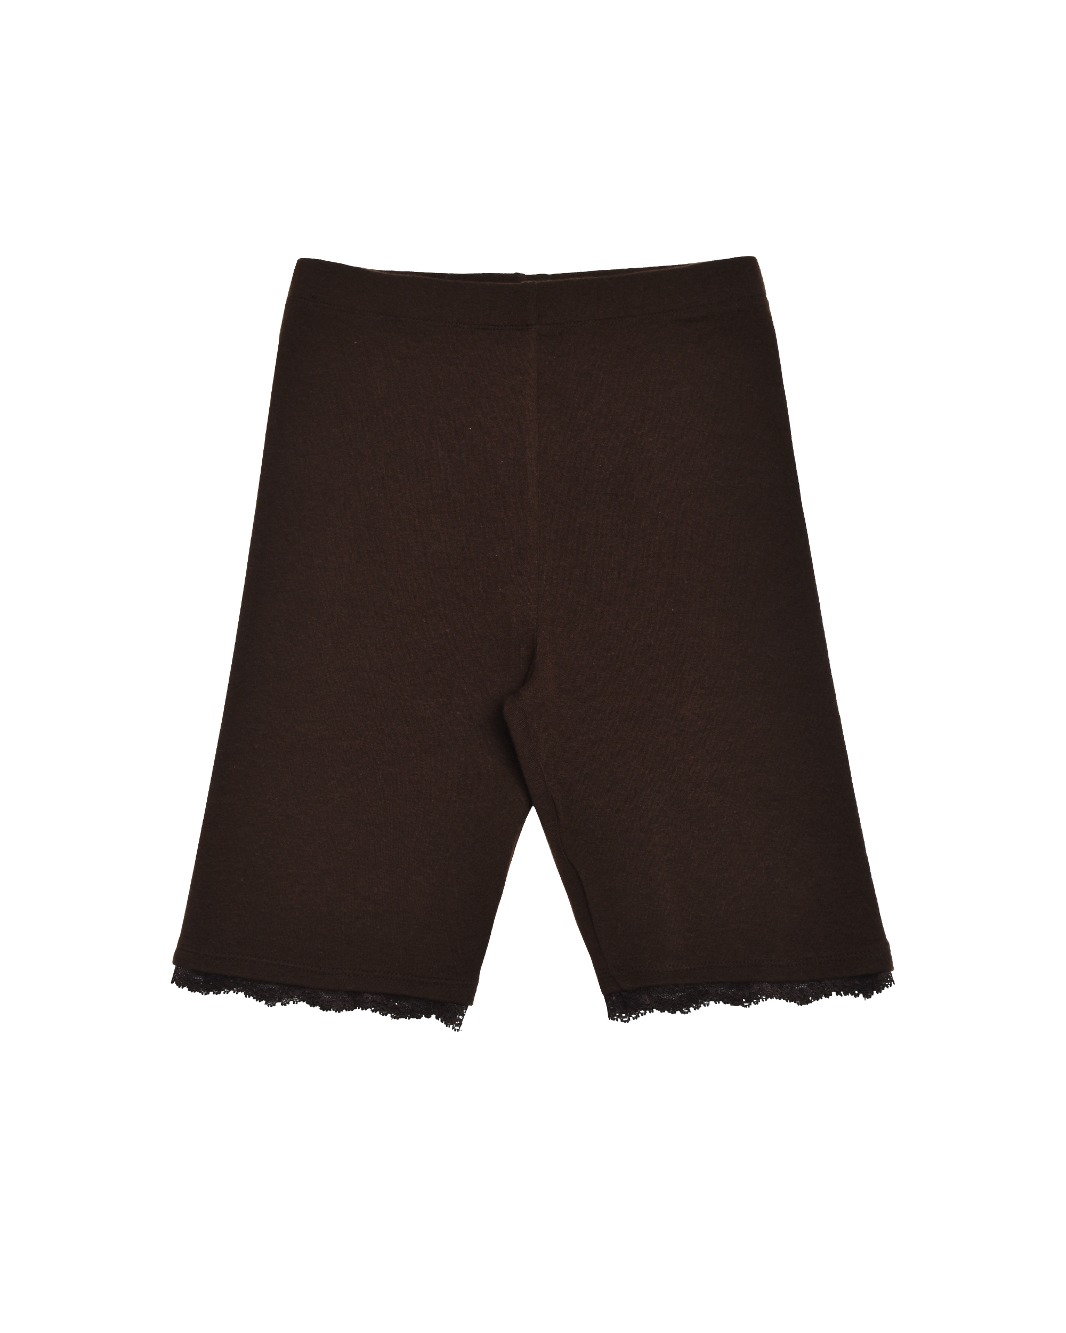 Cozy Lace Shorts (Brown)